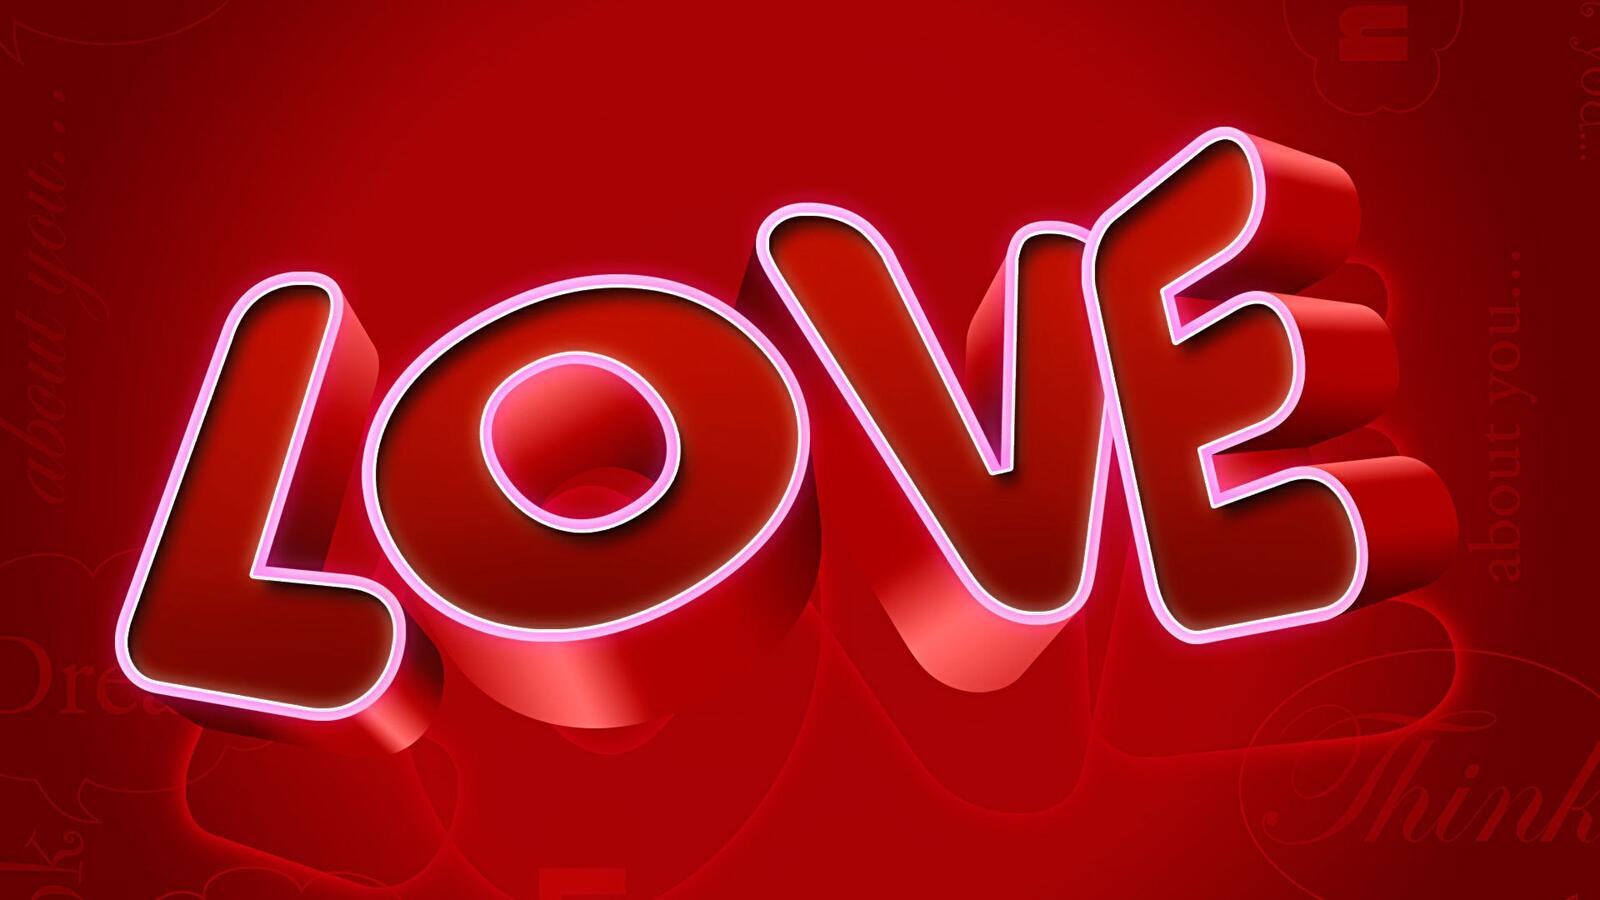 Wallpapers love inscription red on the desktop